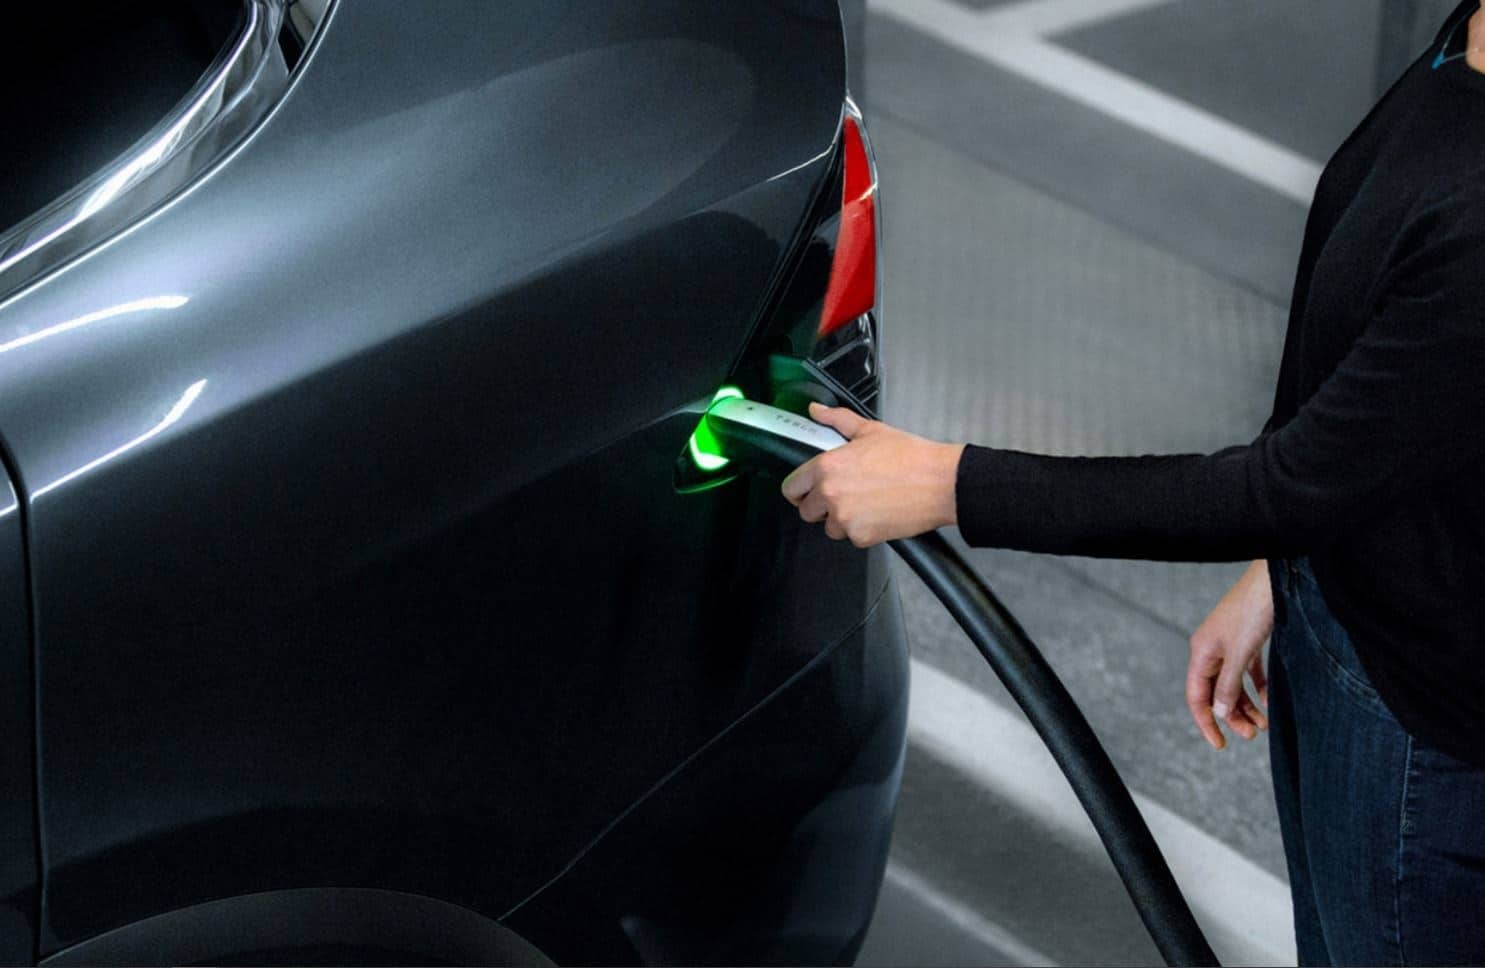 LAZ Parking Announces New Electric Vehicle Charging Program to Install